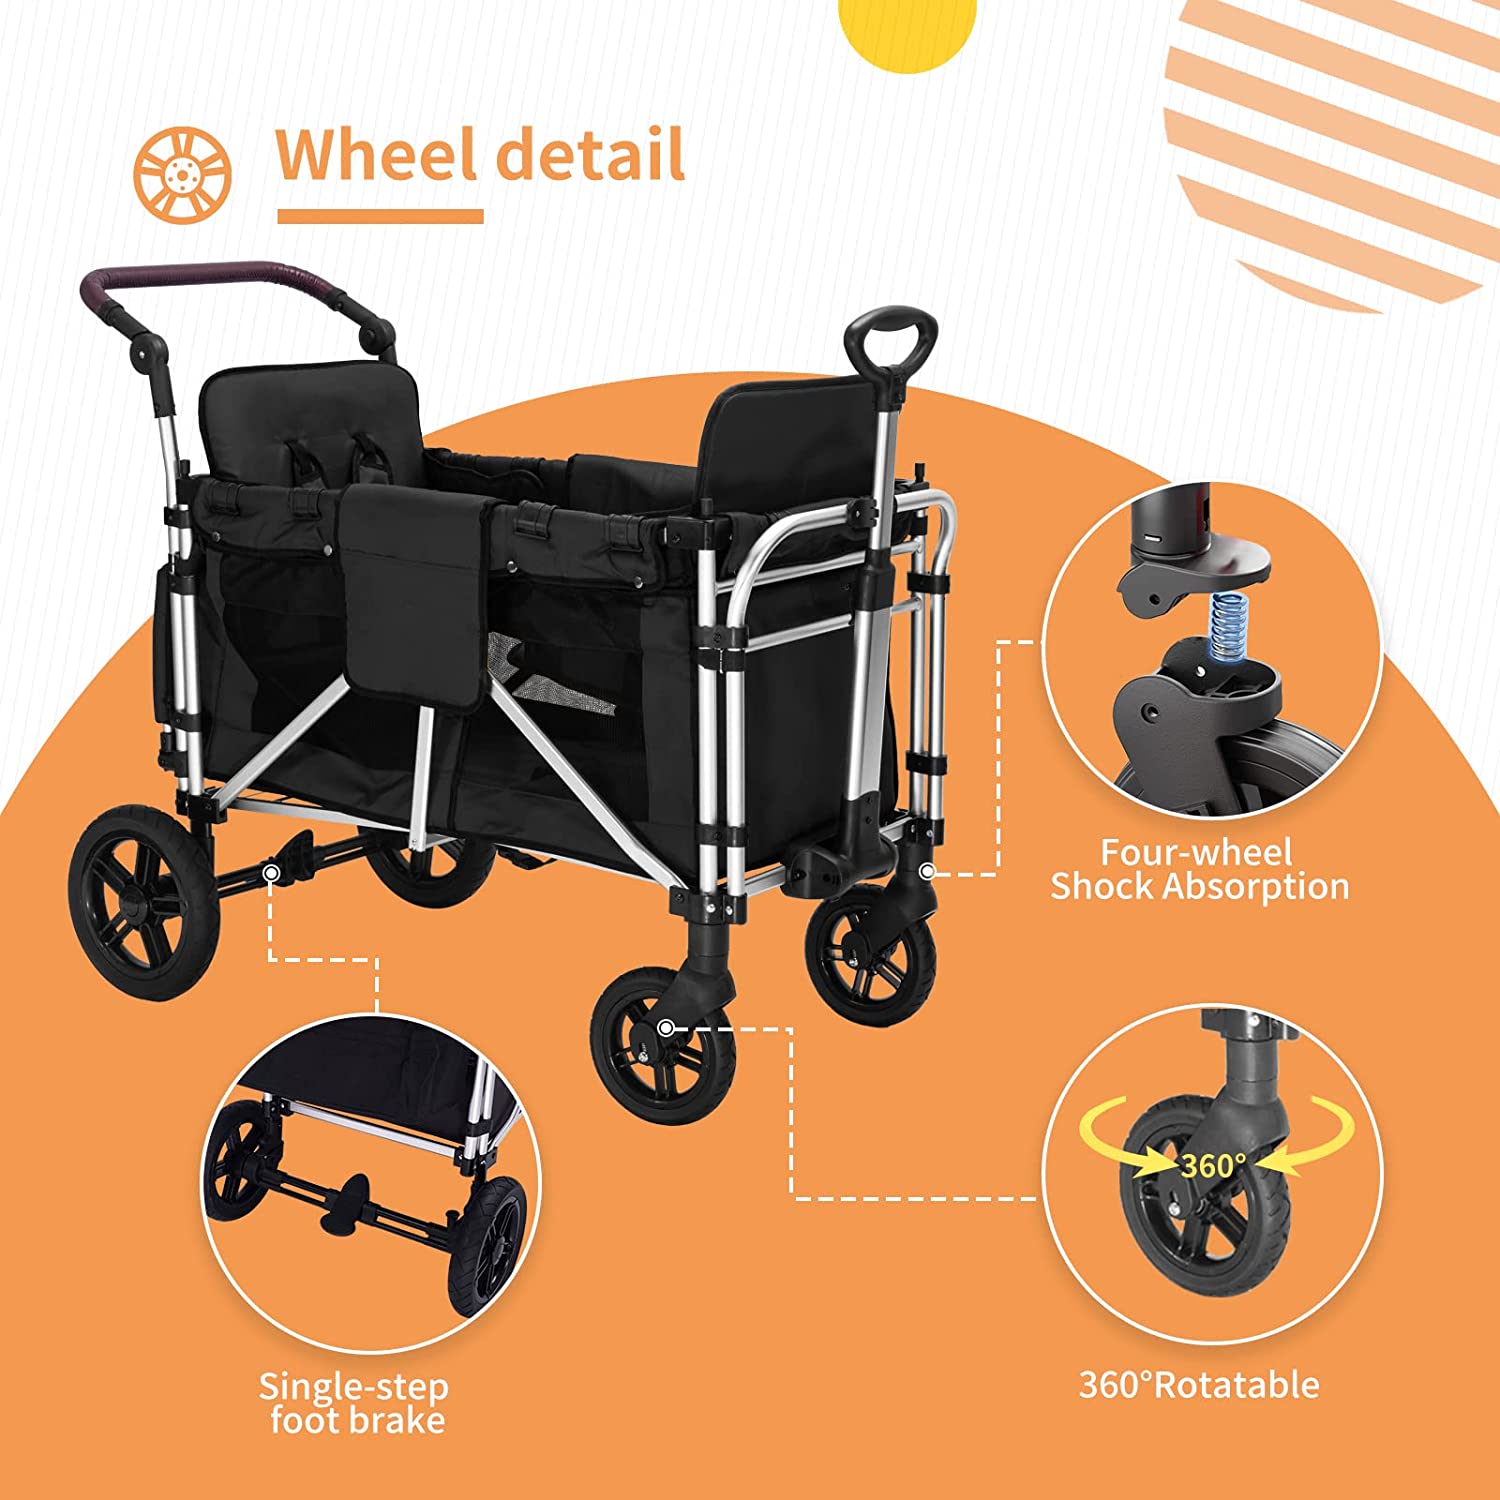 Linor Stroller Wagon for 2 Kids, Wagon Cart Featuring 2 High Seat with ...